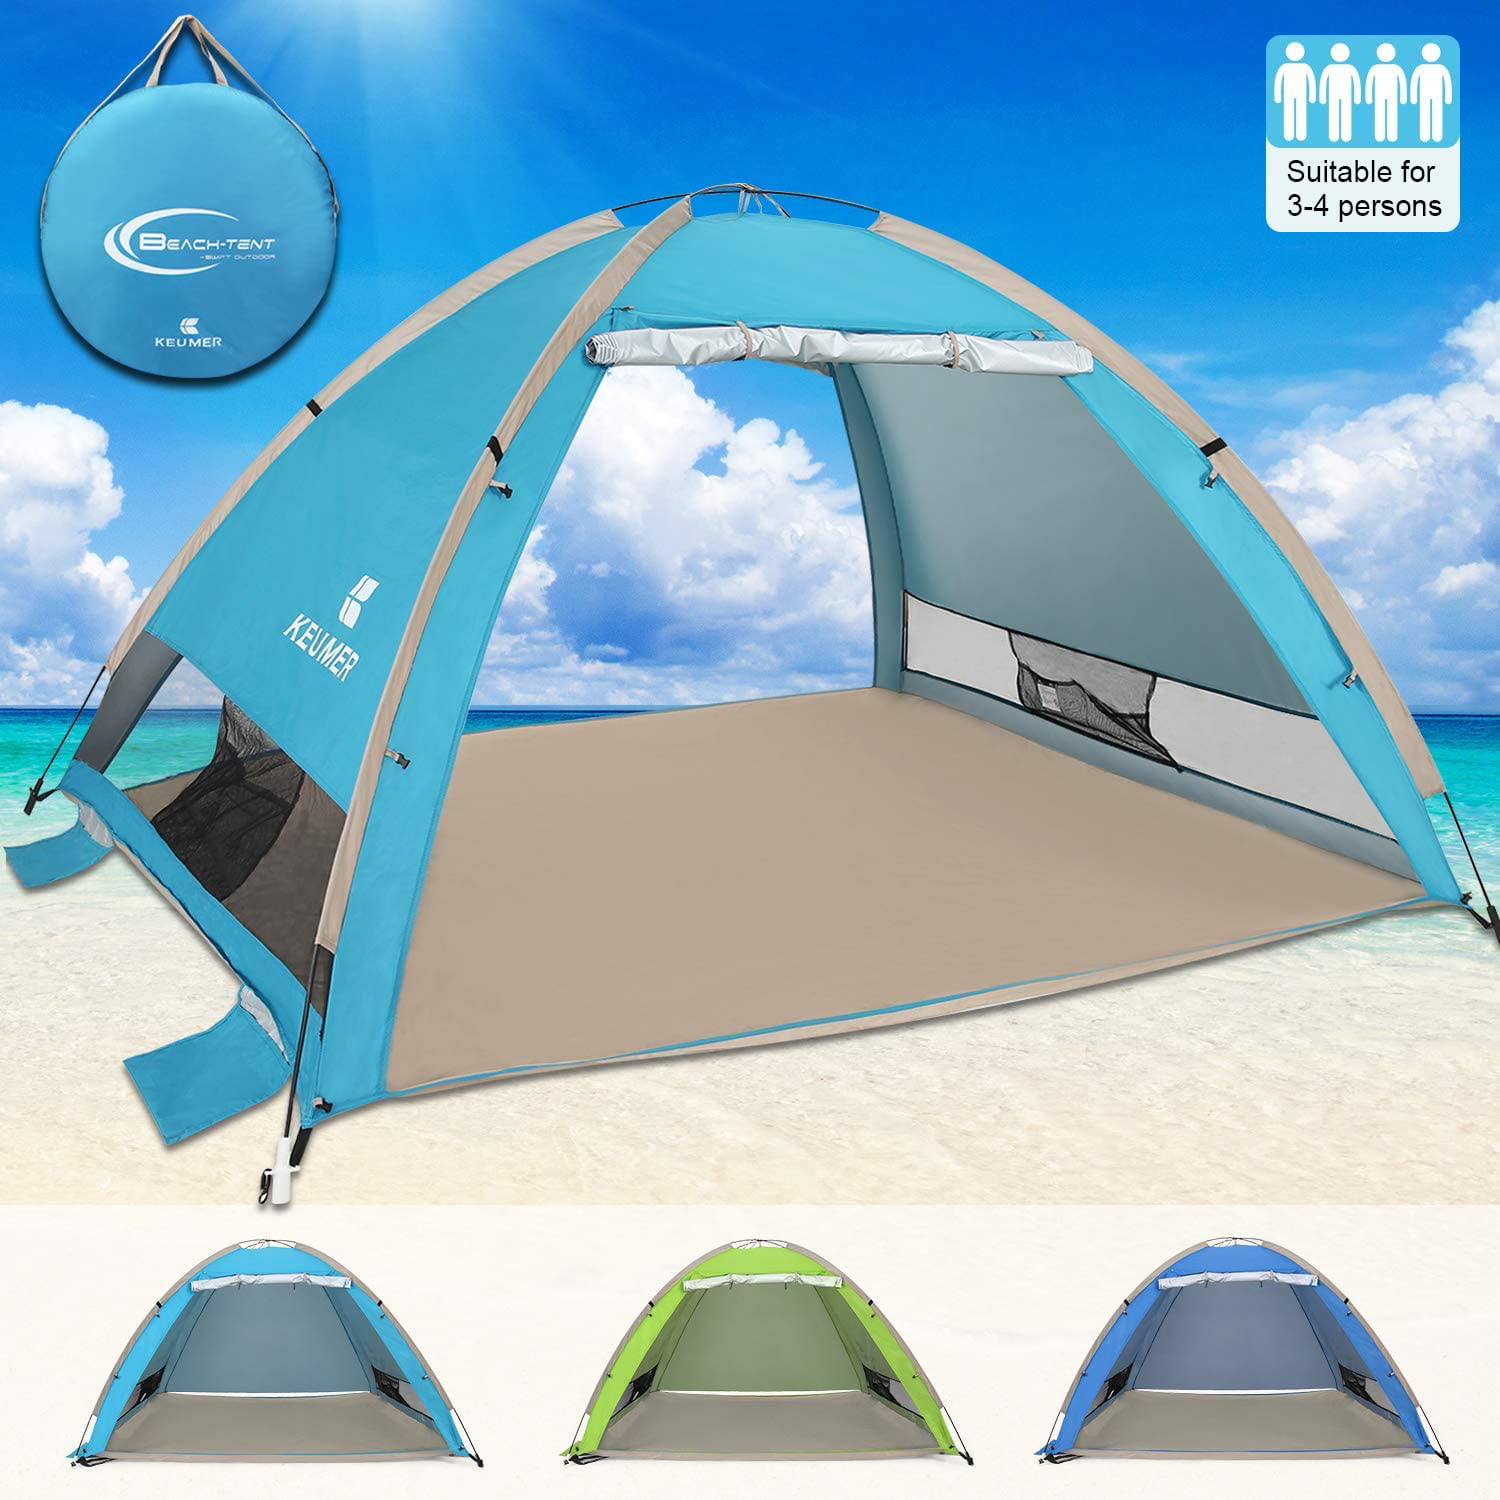 G4Free Pop Up Beach Tent Portable Sun Shelter Instant Outdoor Camping Cabana